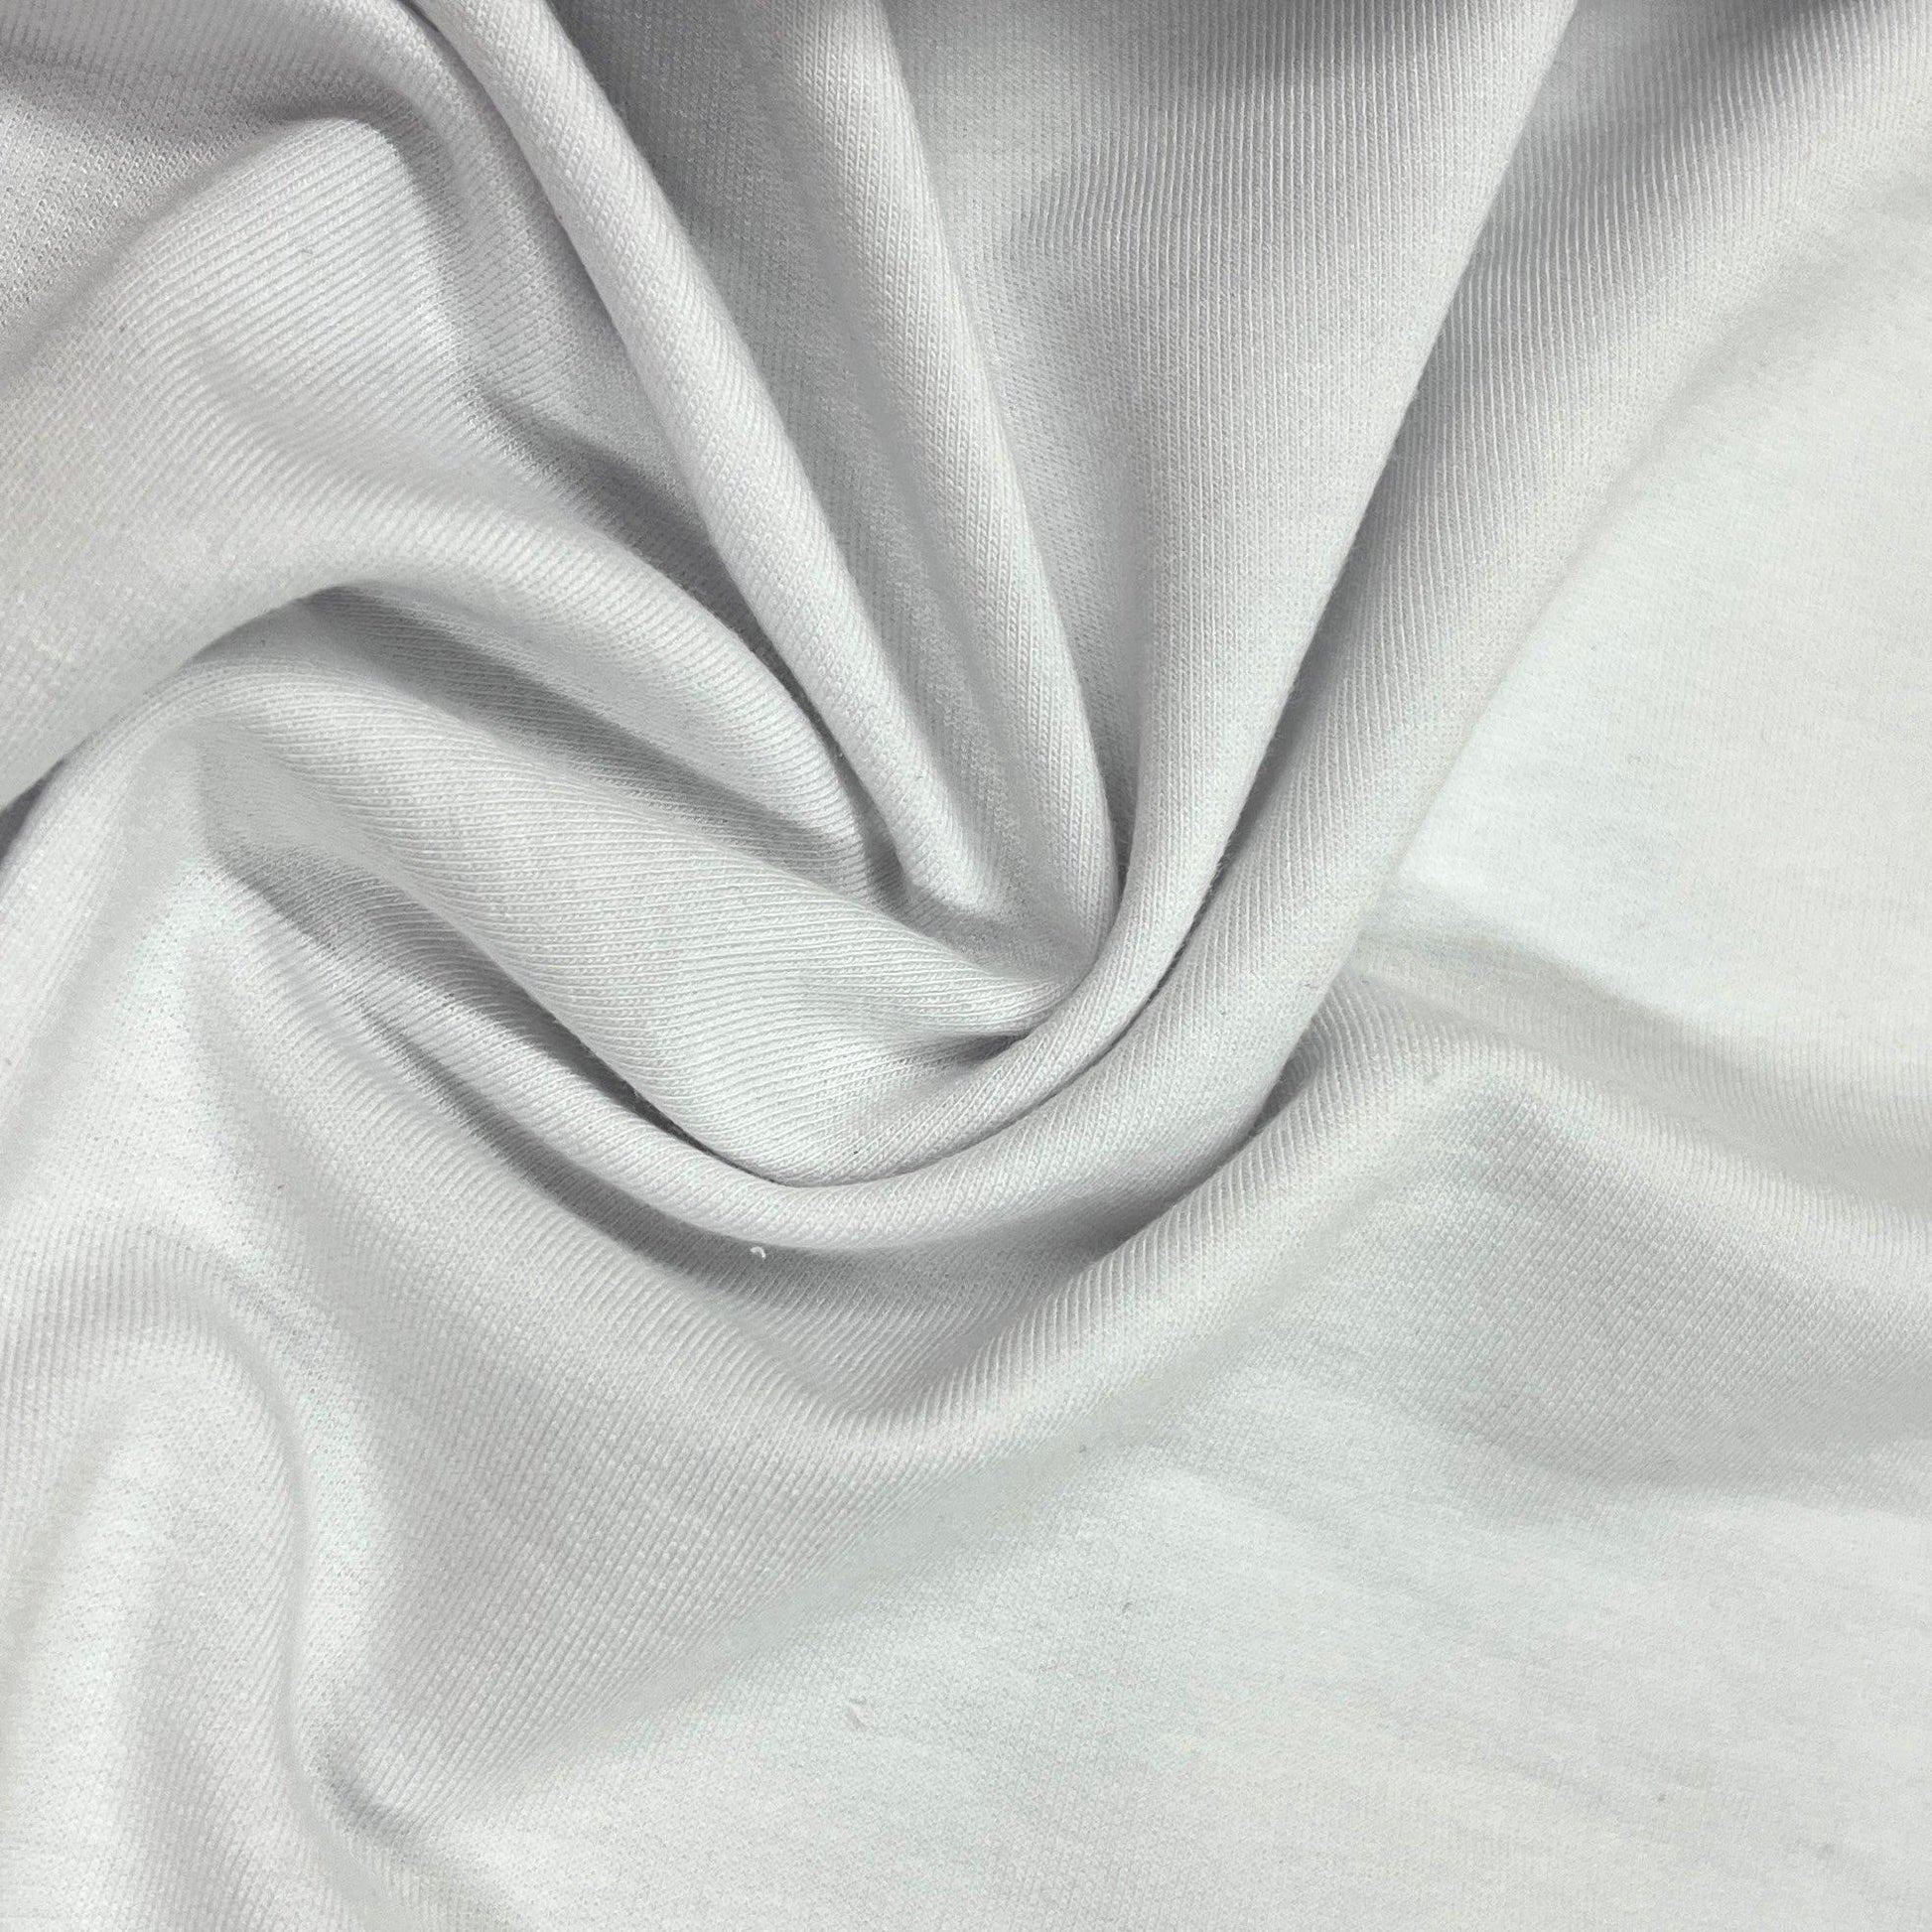 White Bamboo Stretch French Terry Fabric - 380 GSM, Knit in the USA, $14.50/yd, 15 Yards - Nature's Fabrics